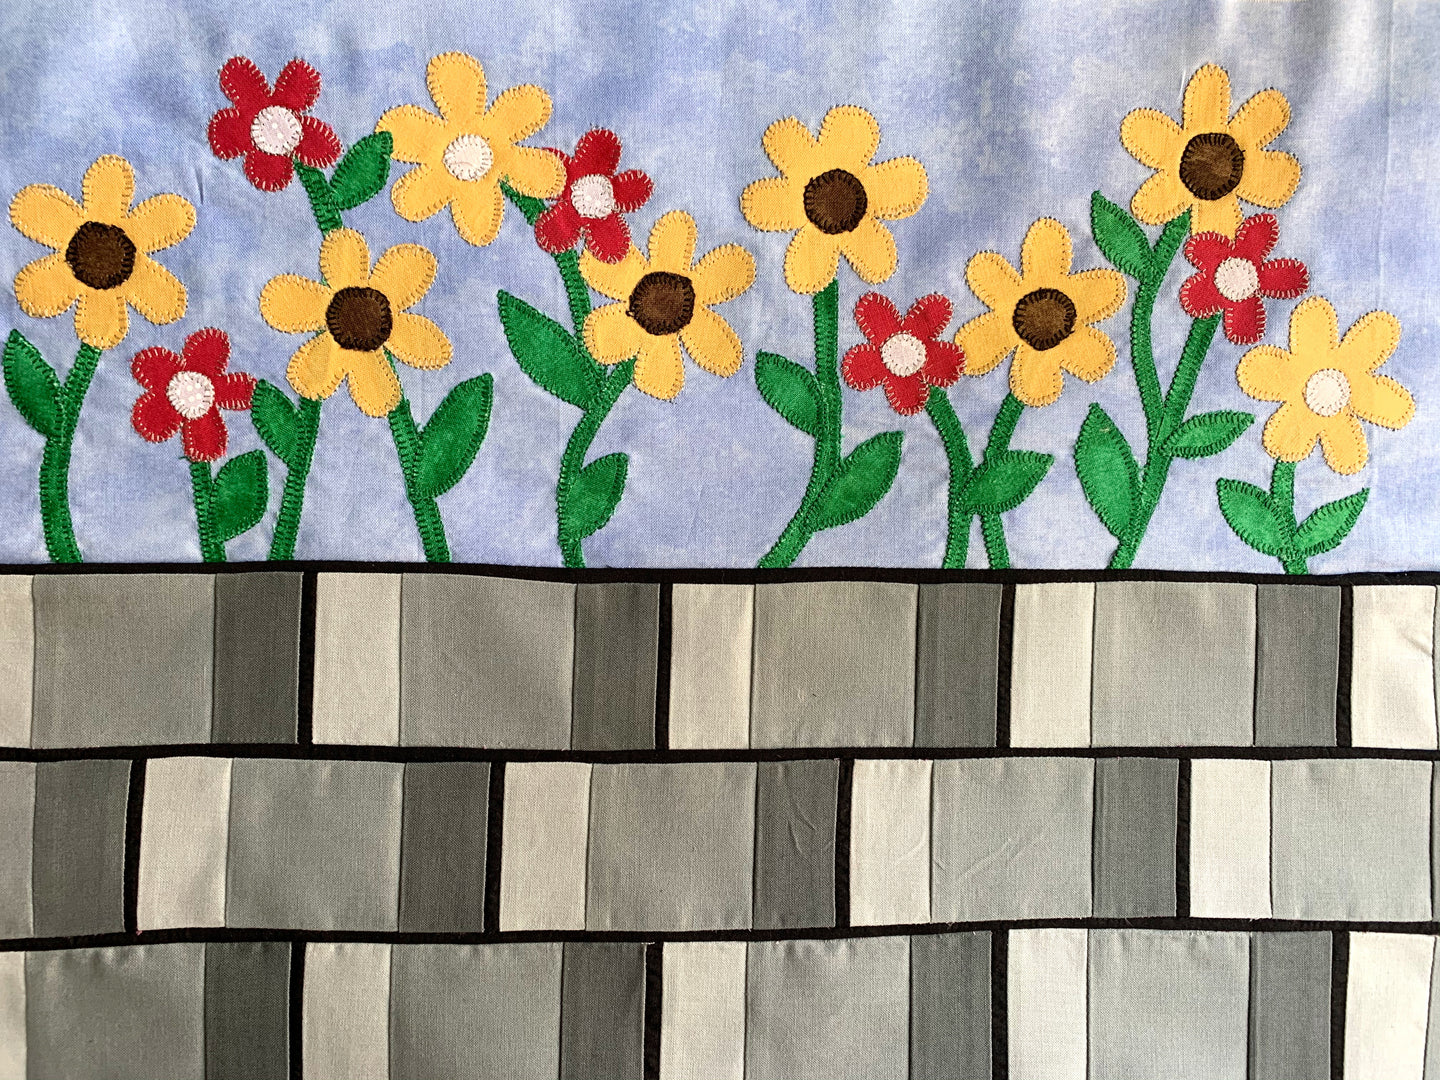 Sunflowers on a brick wall quilt row or quilt block